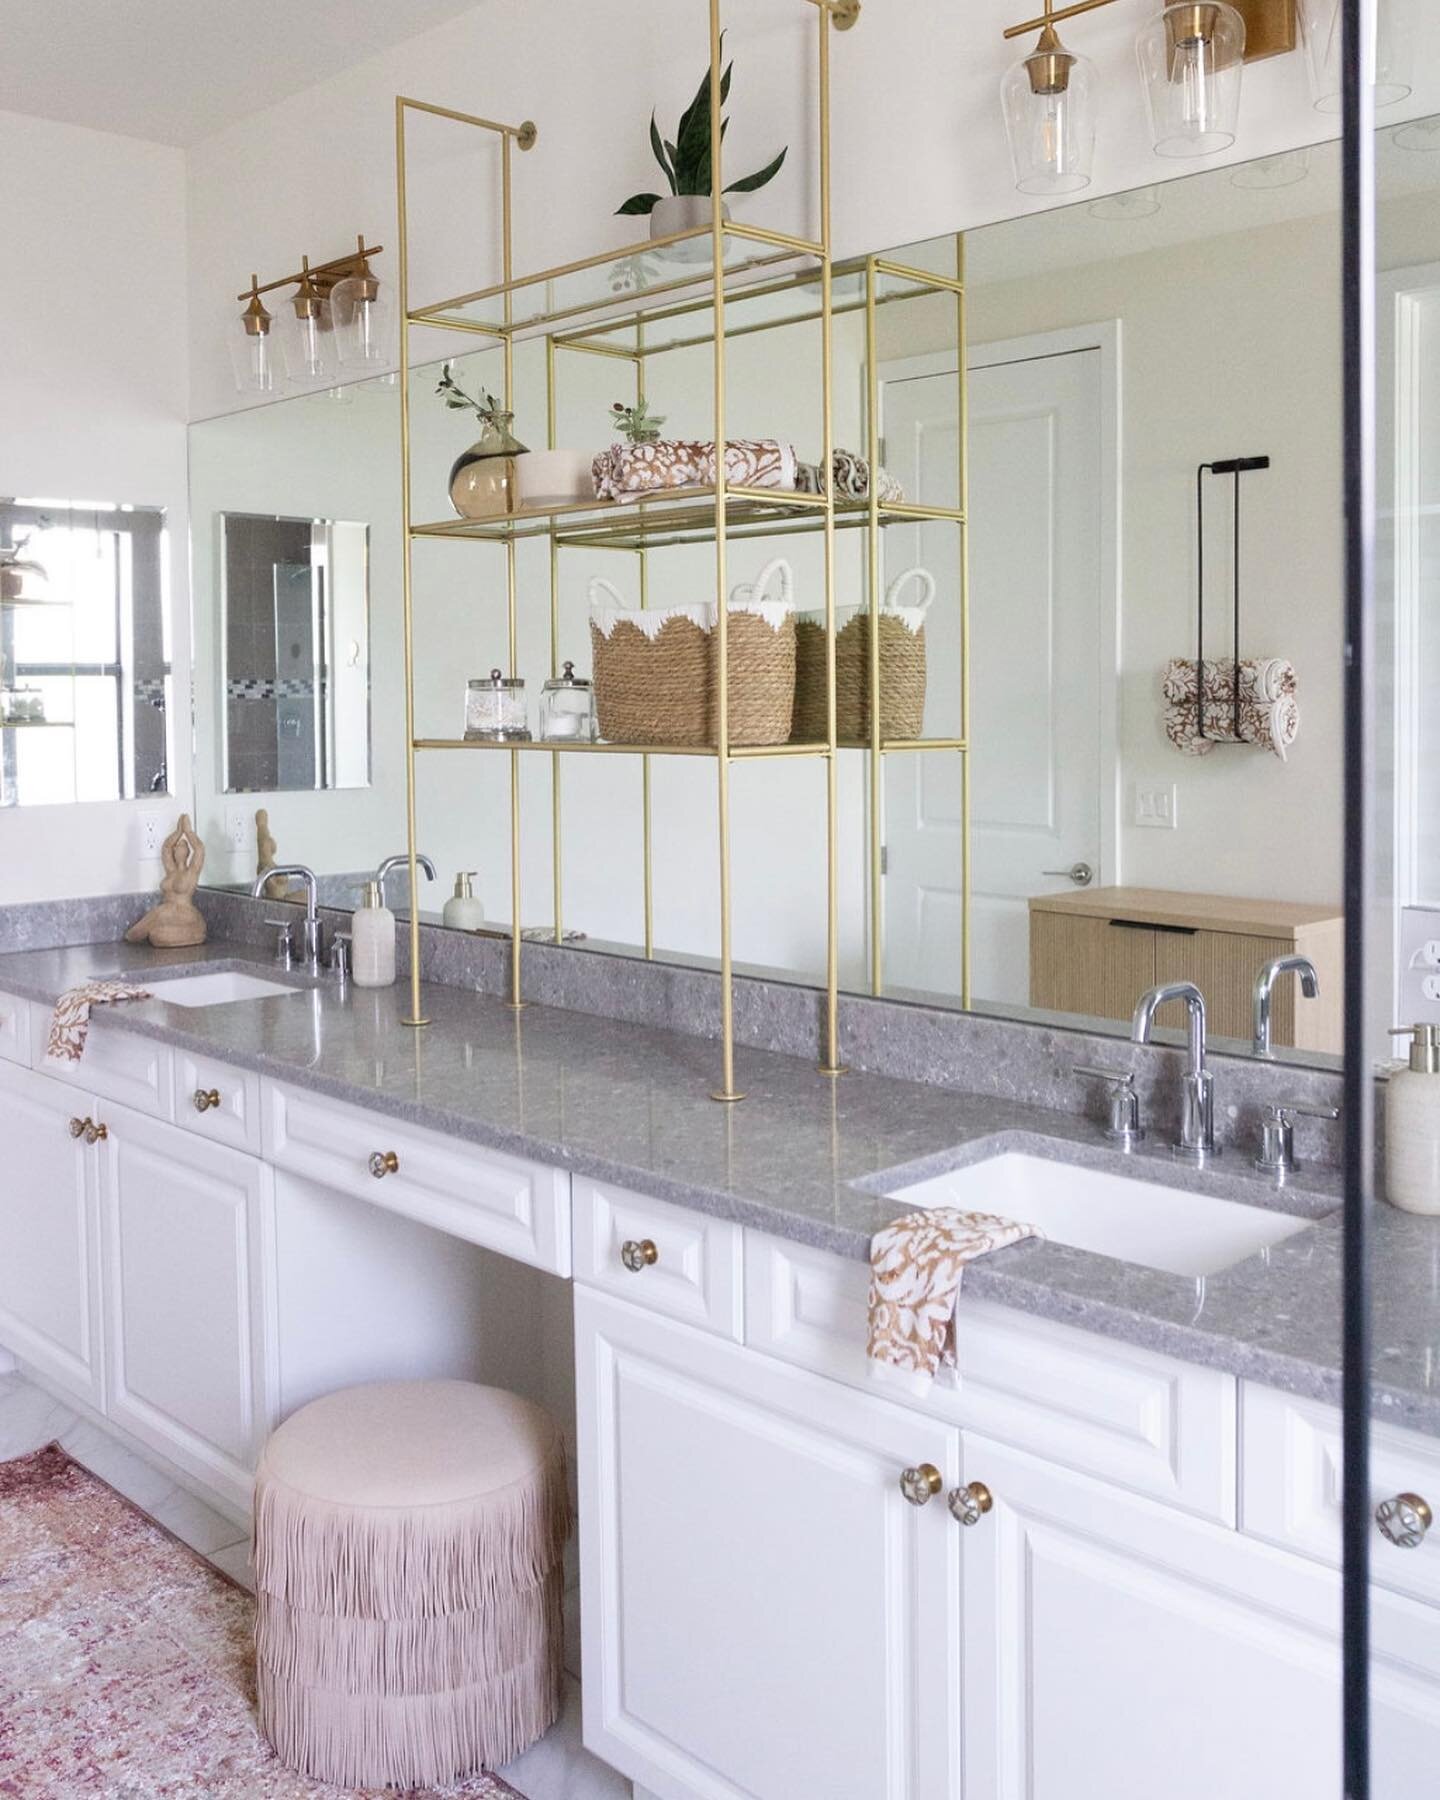 Nothing like new lighting, hardware and a custom shelving unit to take this bathroom from builder grade to a bit more custom with character ✨
&bull;
&bull;
&bull;
&bull;
&bull;
#interiordesign #southflinteriordesigner #bathroomgoals